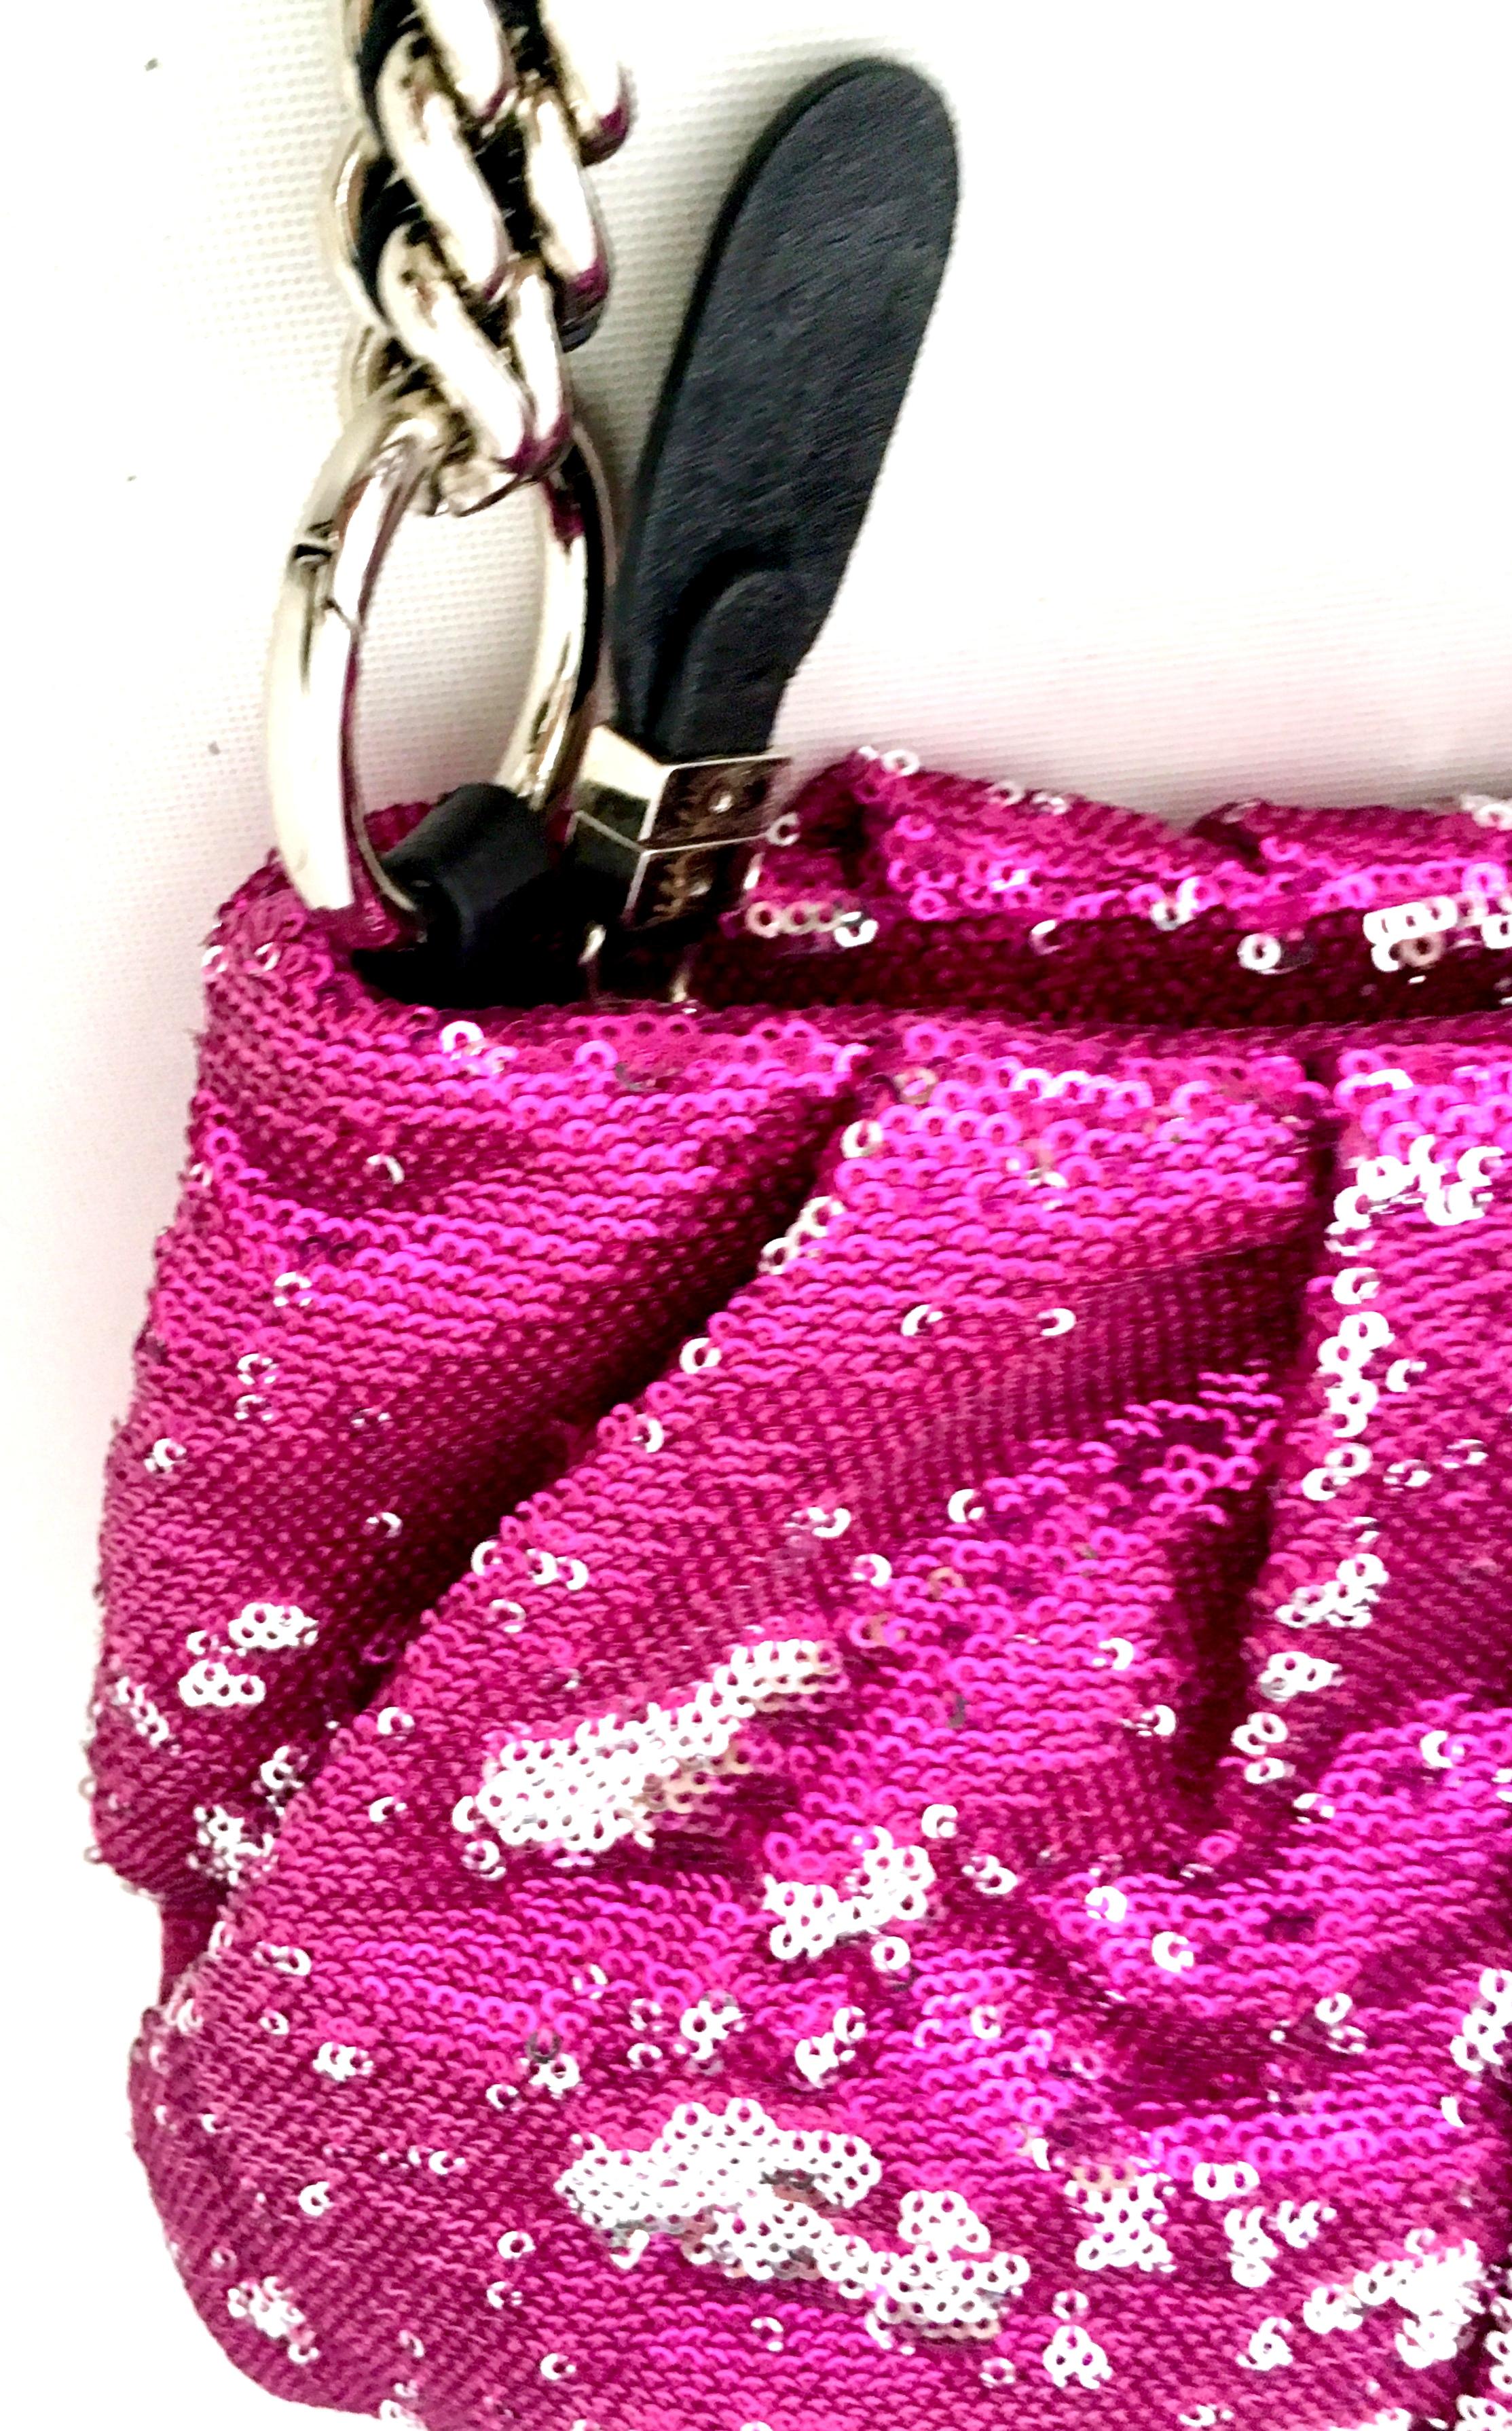 21st Century Contemporary Sequin, Leather & Chrome Hand Bag By, OrYanny 8